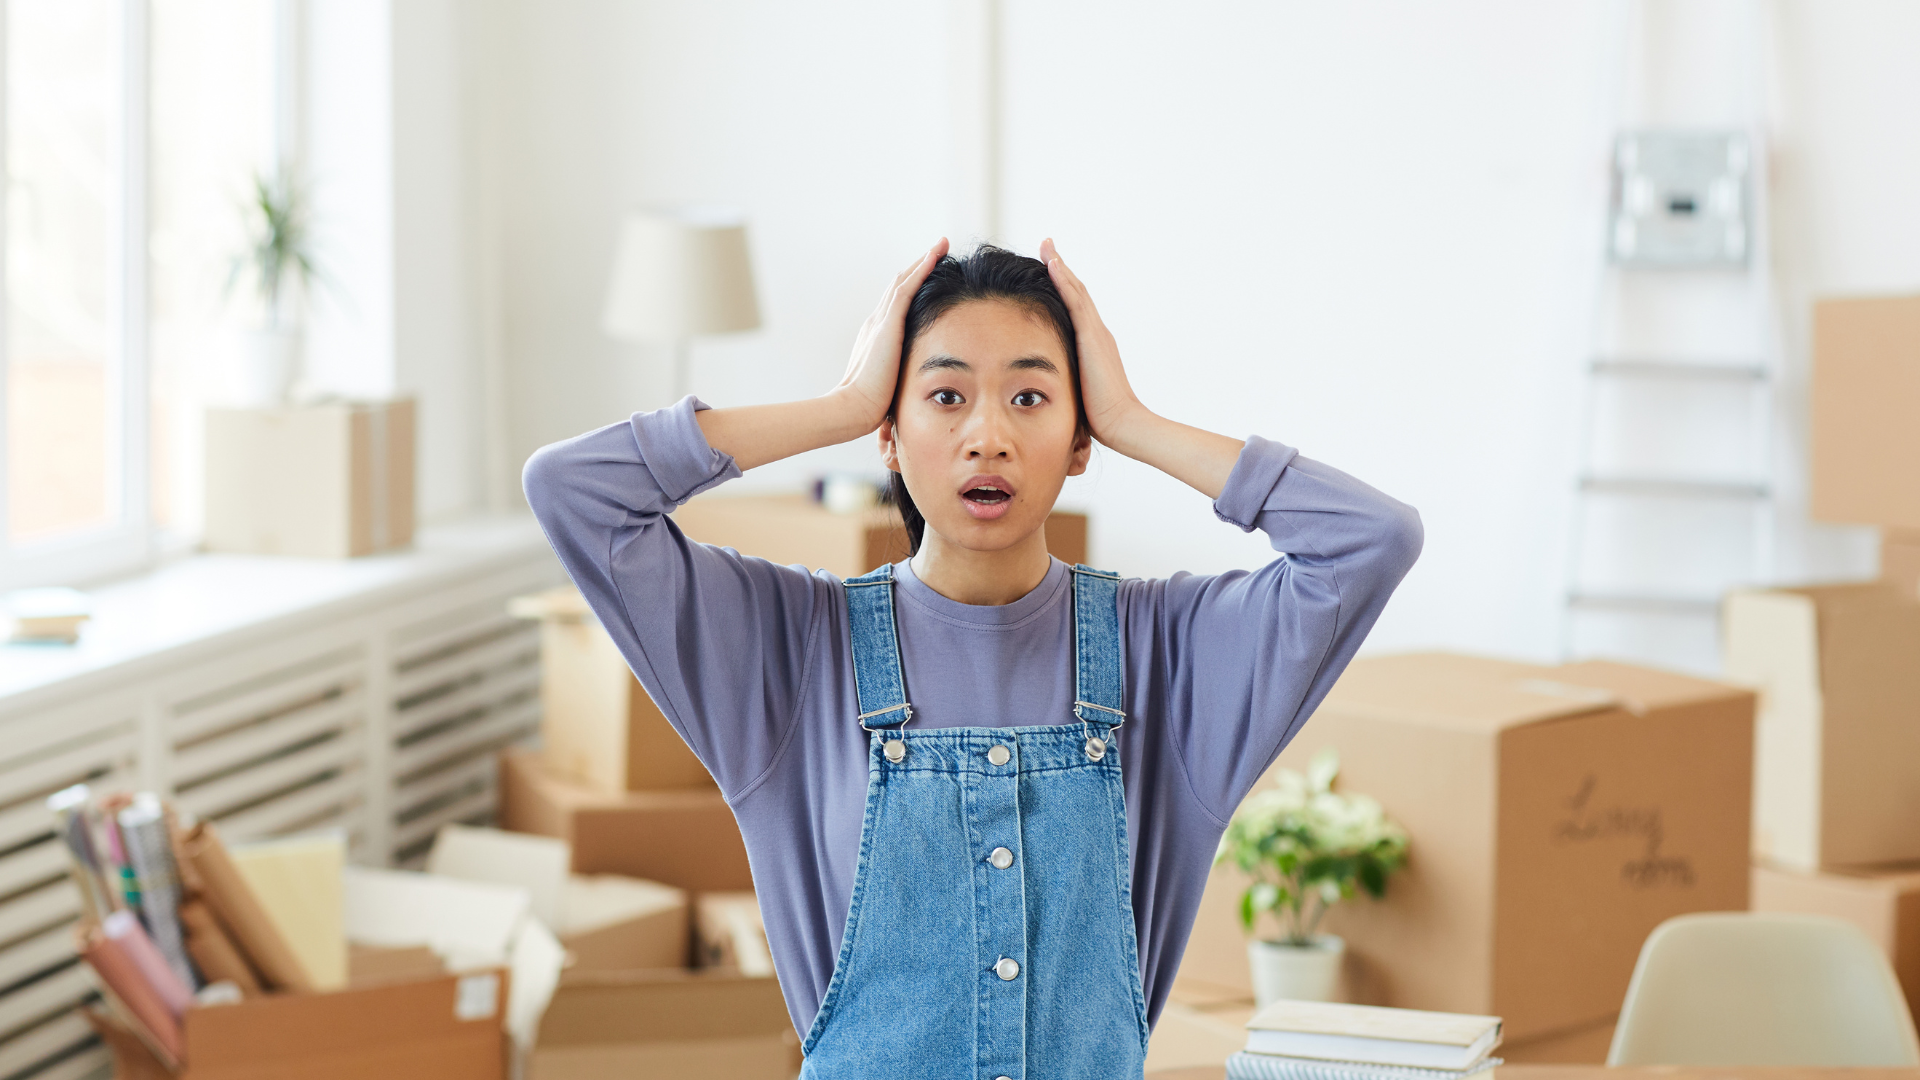 woman surrounded by moving boxes looking flustered